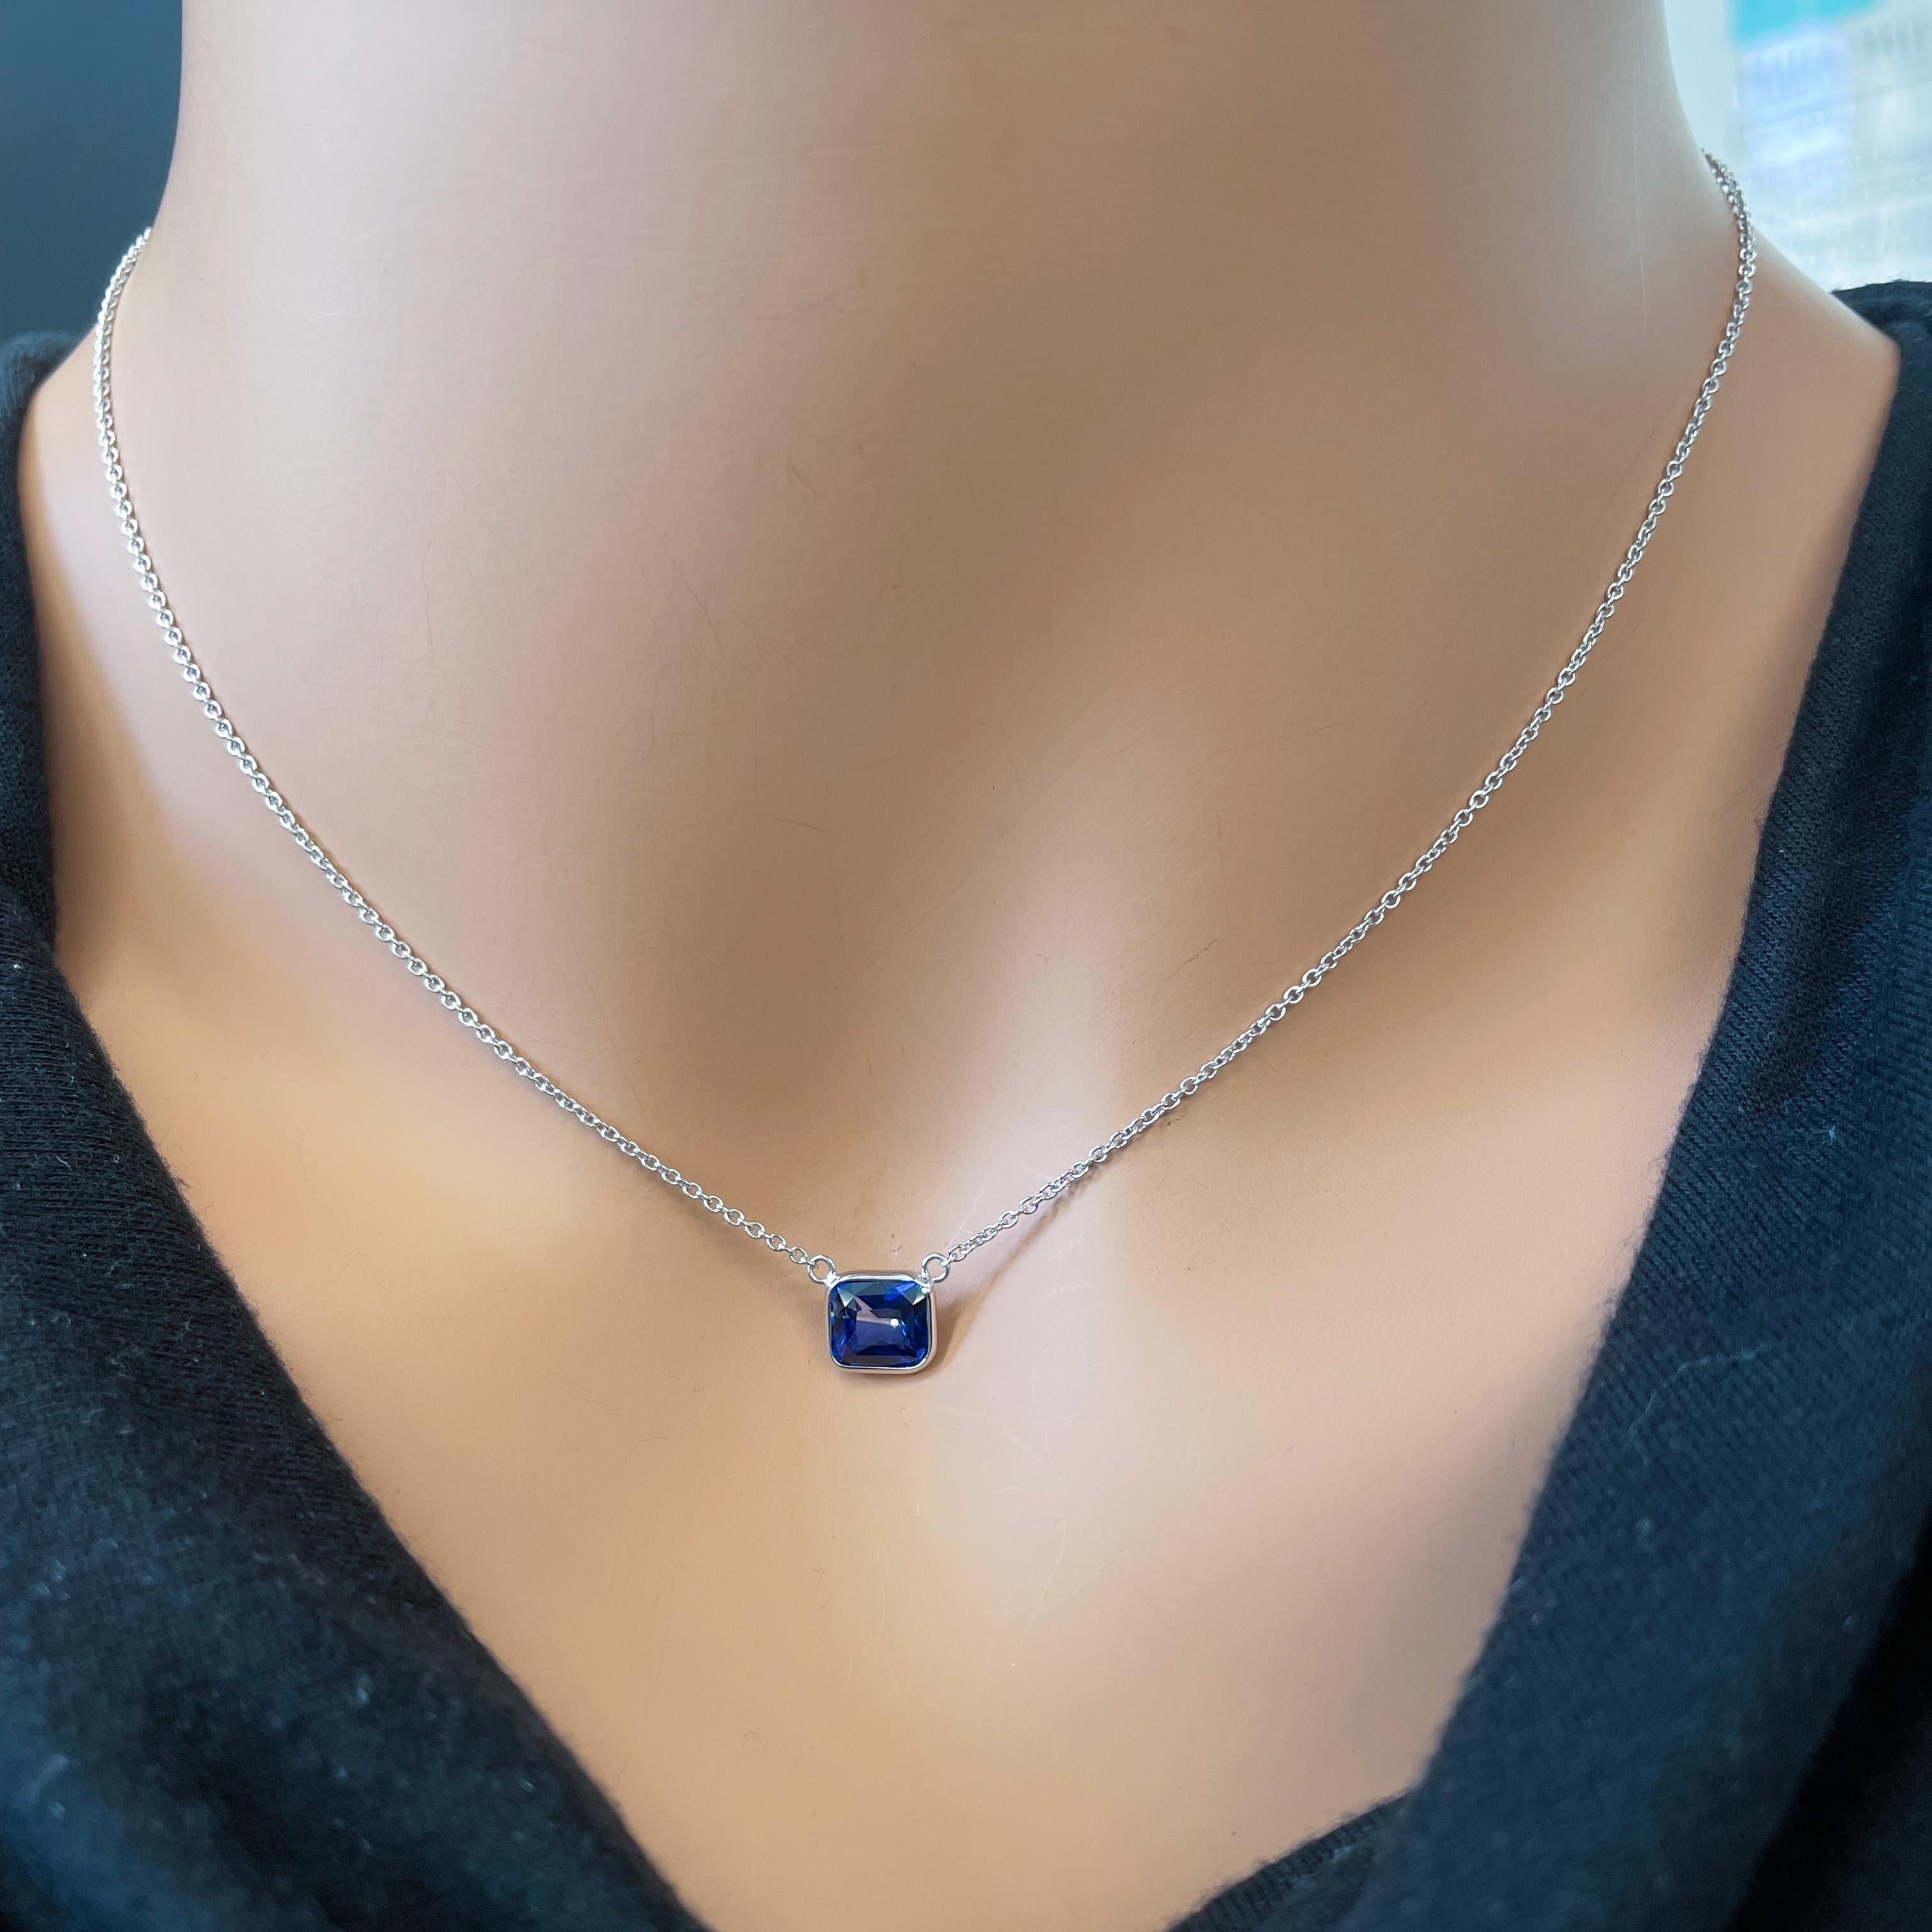 Octagon Cut 1.80 Carat Blue Octagonal Cut Sapphire Fashion Necklaces In 14K White Gold  For Sale